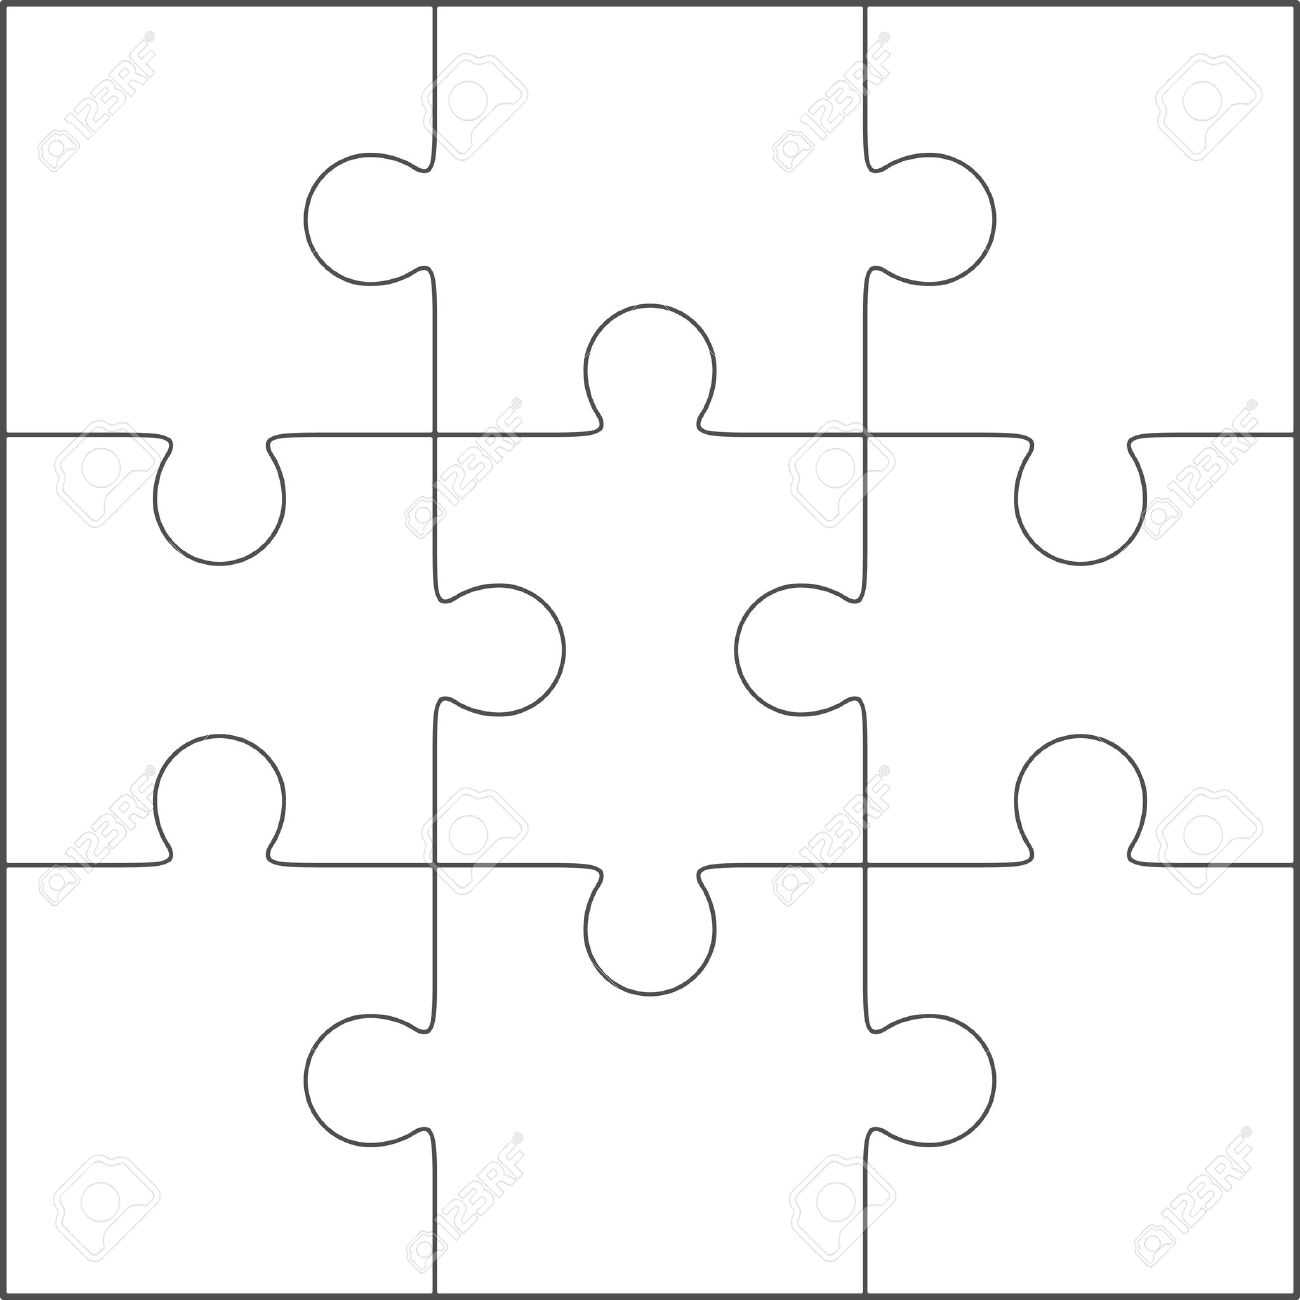 Jigsaw Puzzle Vector, Blank Simple Template 3X3 Within Blank Jigsaw Piece Template